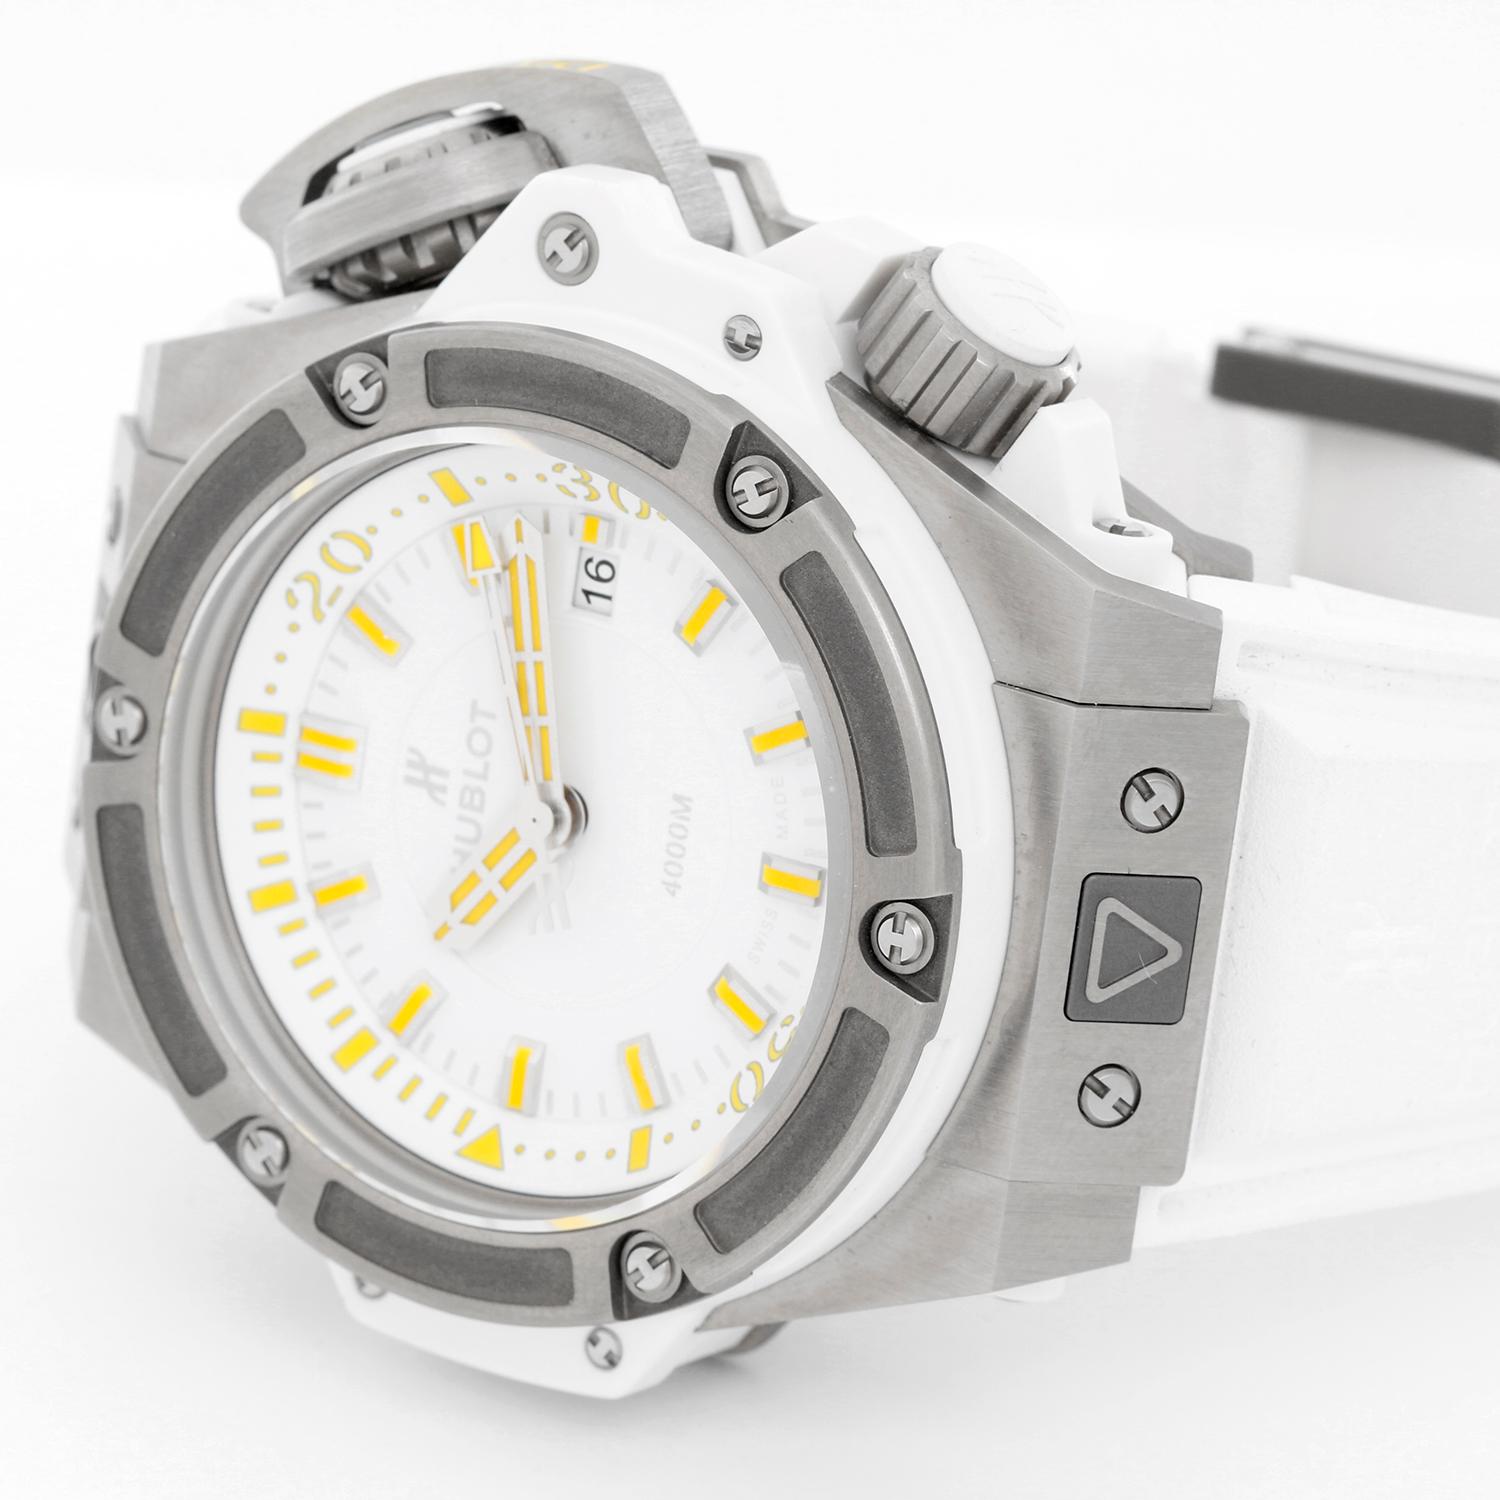 Hublot Oceanographic 4000 Cheval Blanc Randheli Special Edition - Automatic. Titanium and white ceramic case (48mm). White dial with yellow luminous markers. White rubber strap with Titanium Hublot buckle. Unused with Hublot box and papers.  Limited